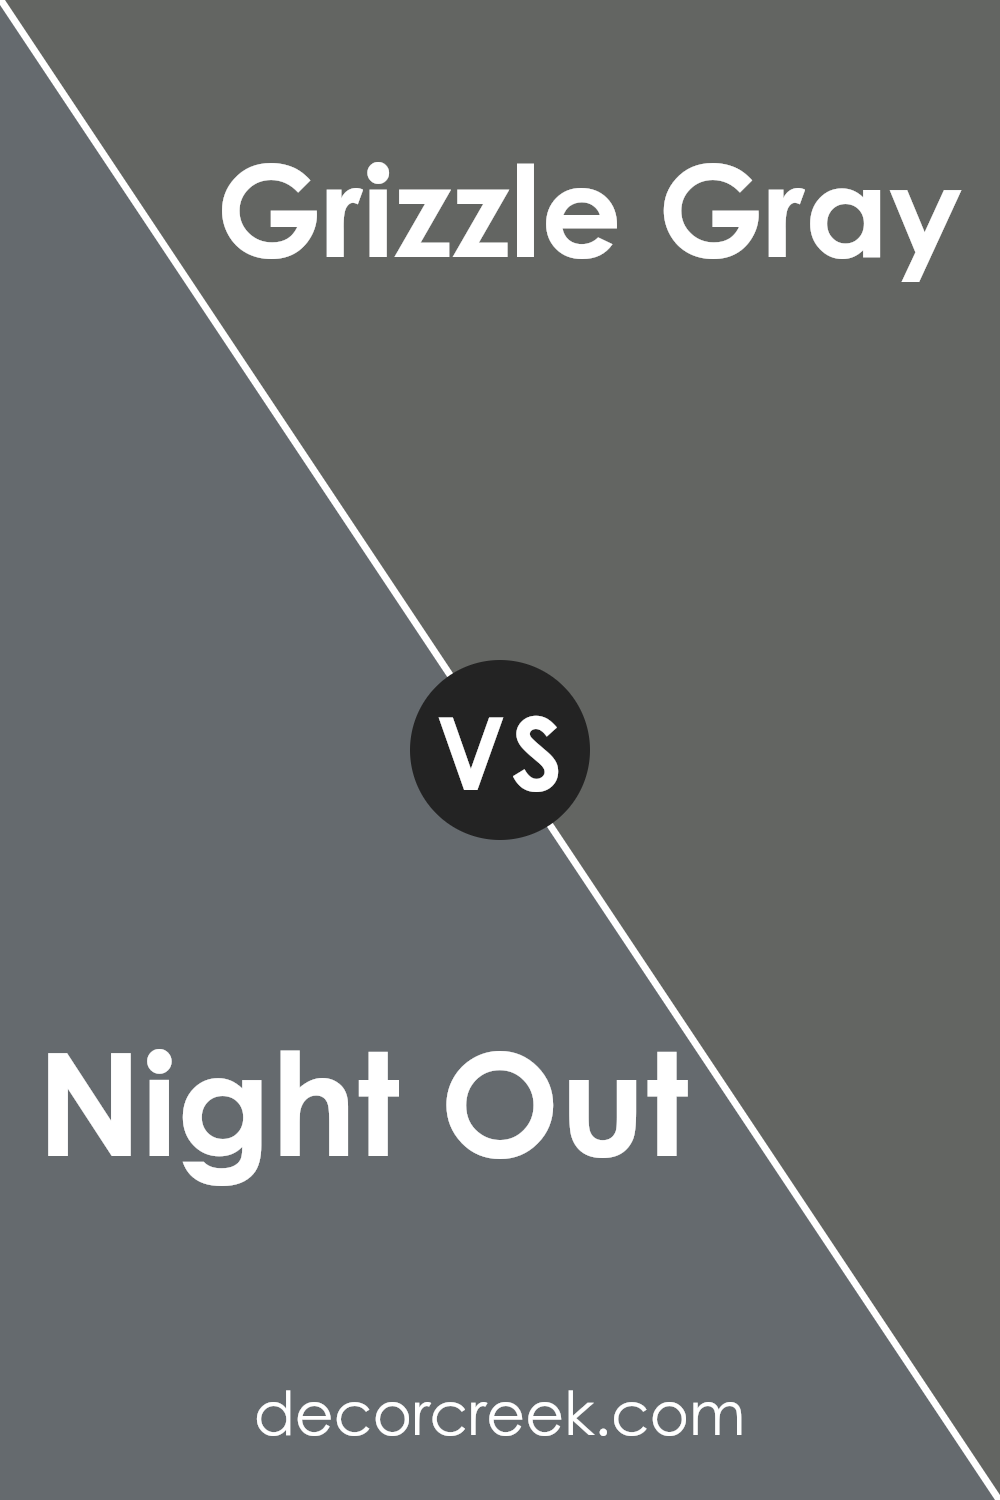 night_out_sw_9560_vs_grizzle_gray_sw_7068